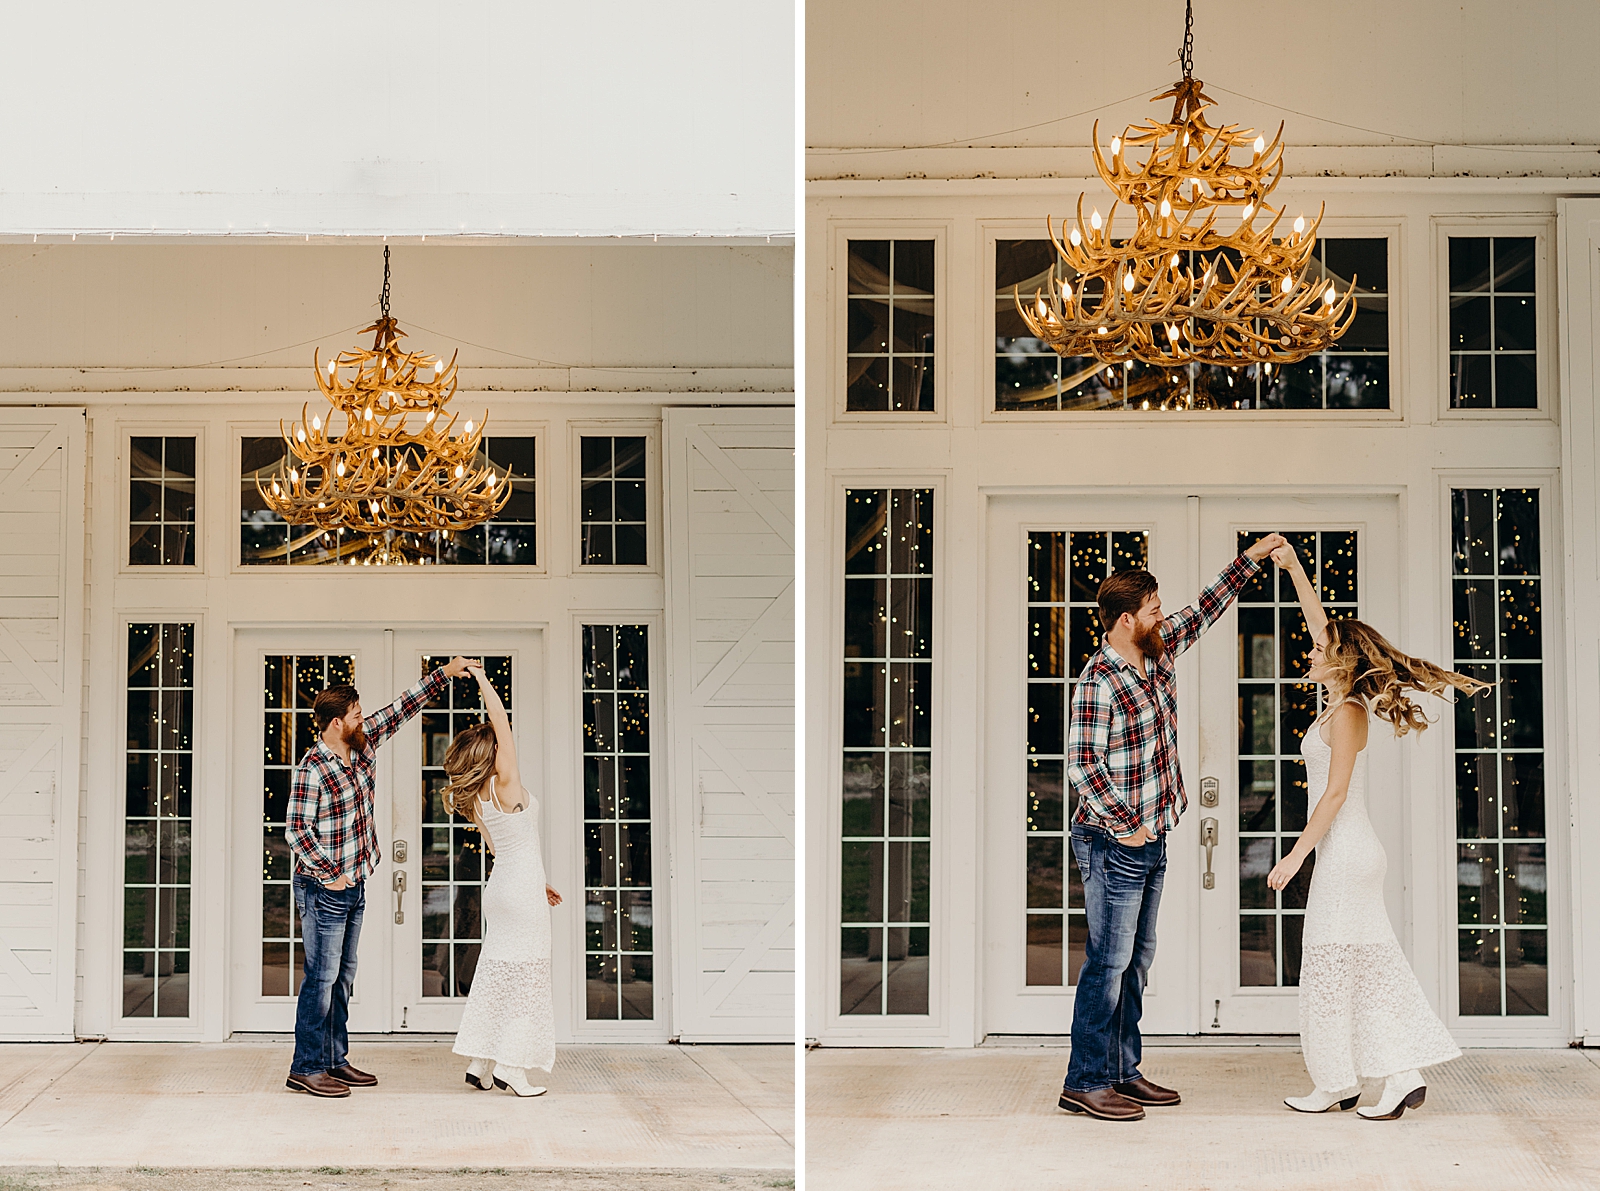 Woman twirling by holding man's hand in the air underneath antler Chandelier  